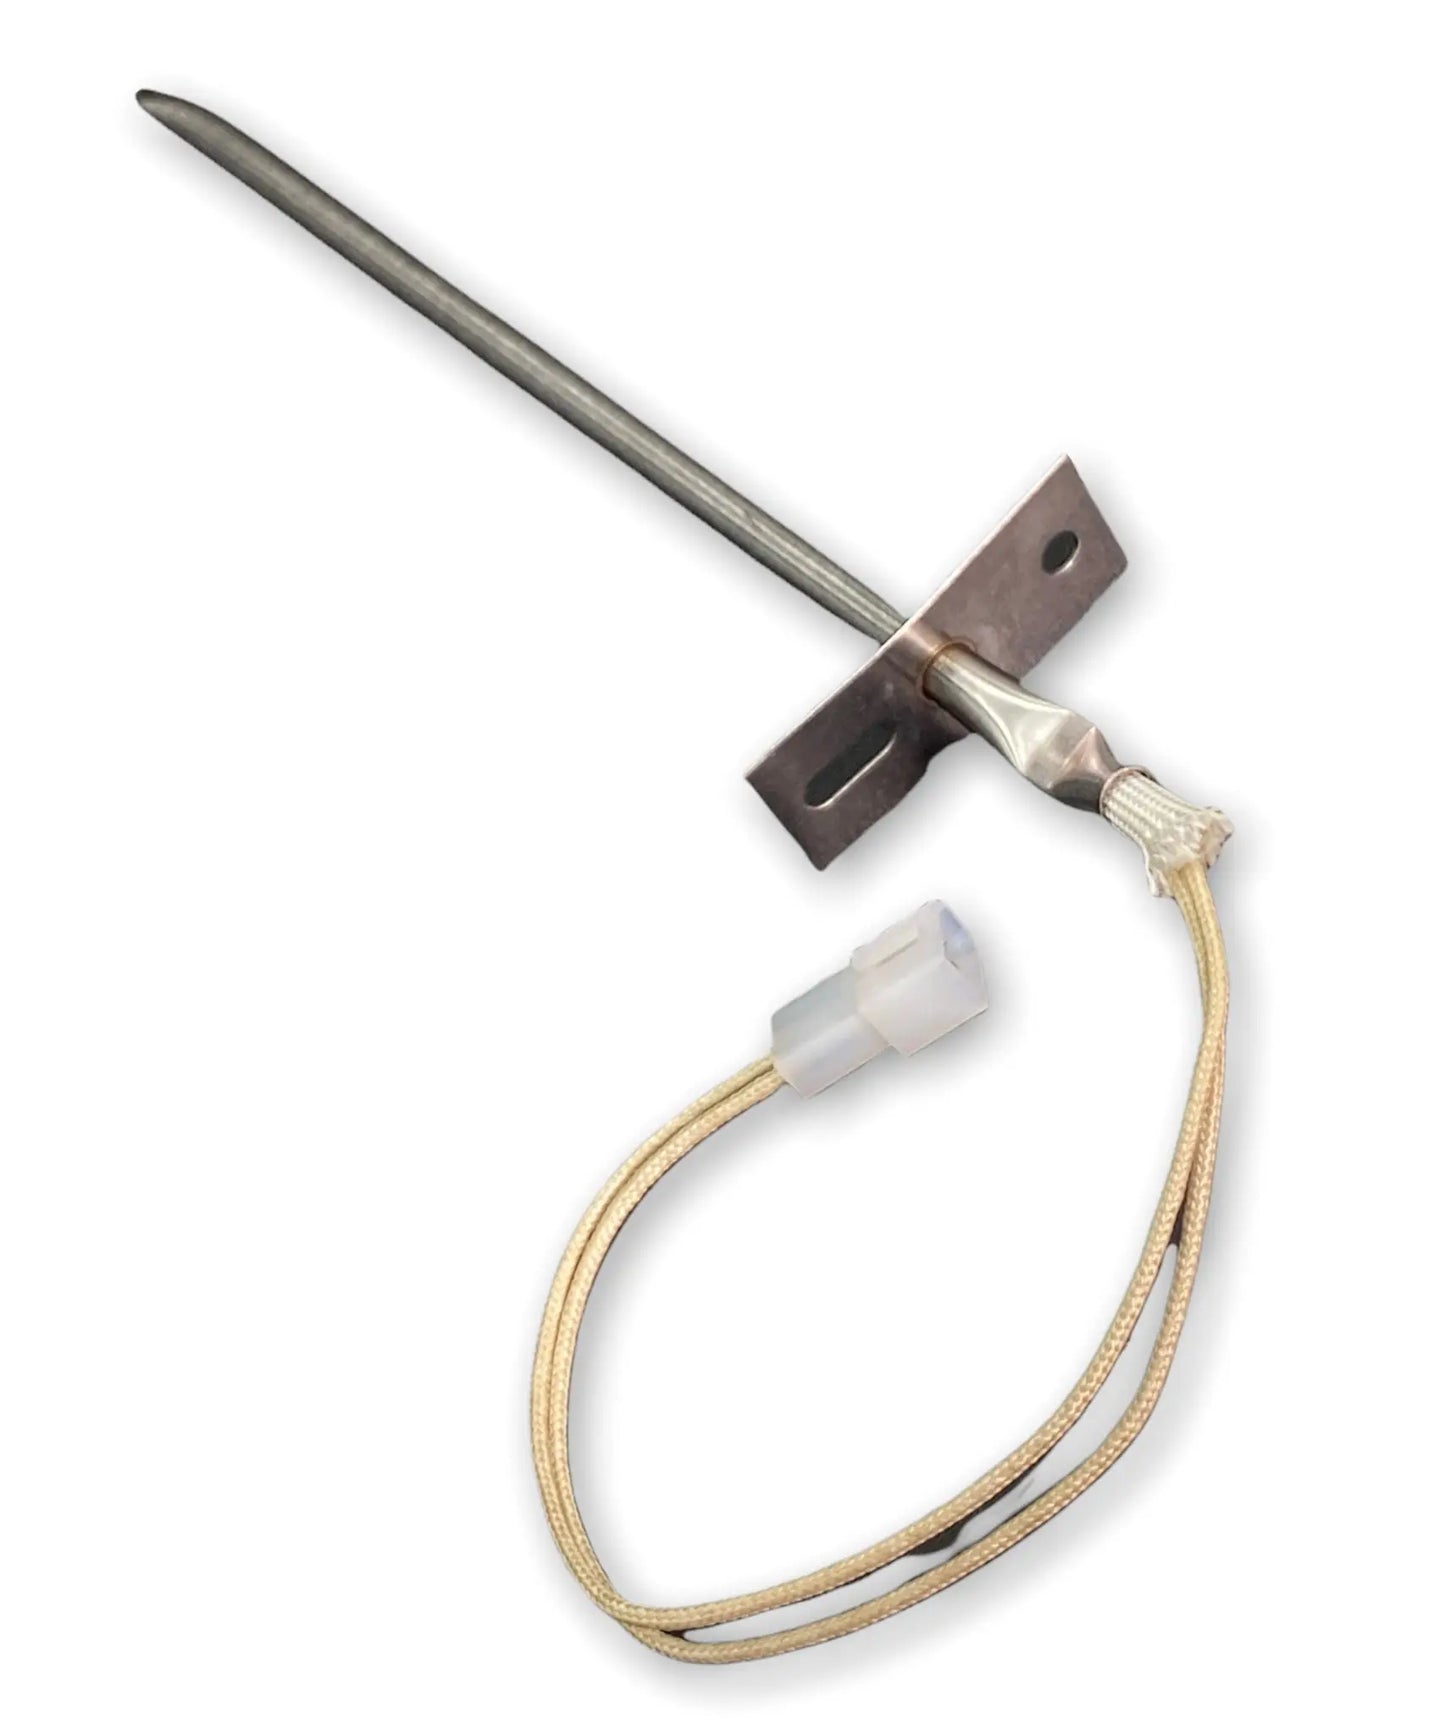 Whirlpool Oven Temperature Sensor - WP8053344 or 8053344, REPLACES: 334300 PD00003031 3148440 3196564 3196966 4337170 4349619 4389458 54-007 814333 4389626 4389882 4389906 8053344 98005641 RG334300 INVERTEC